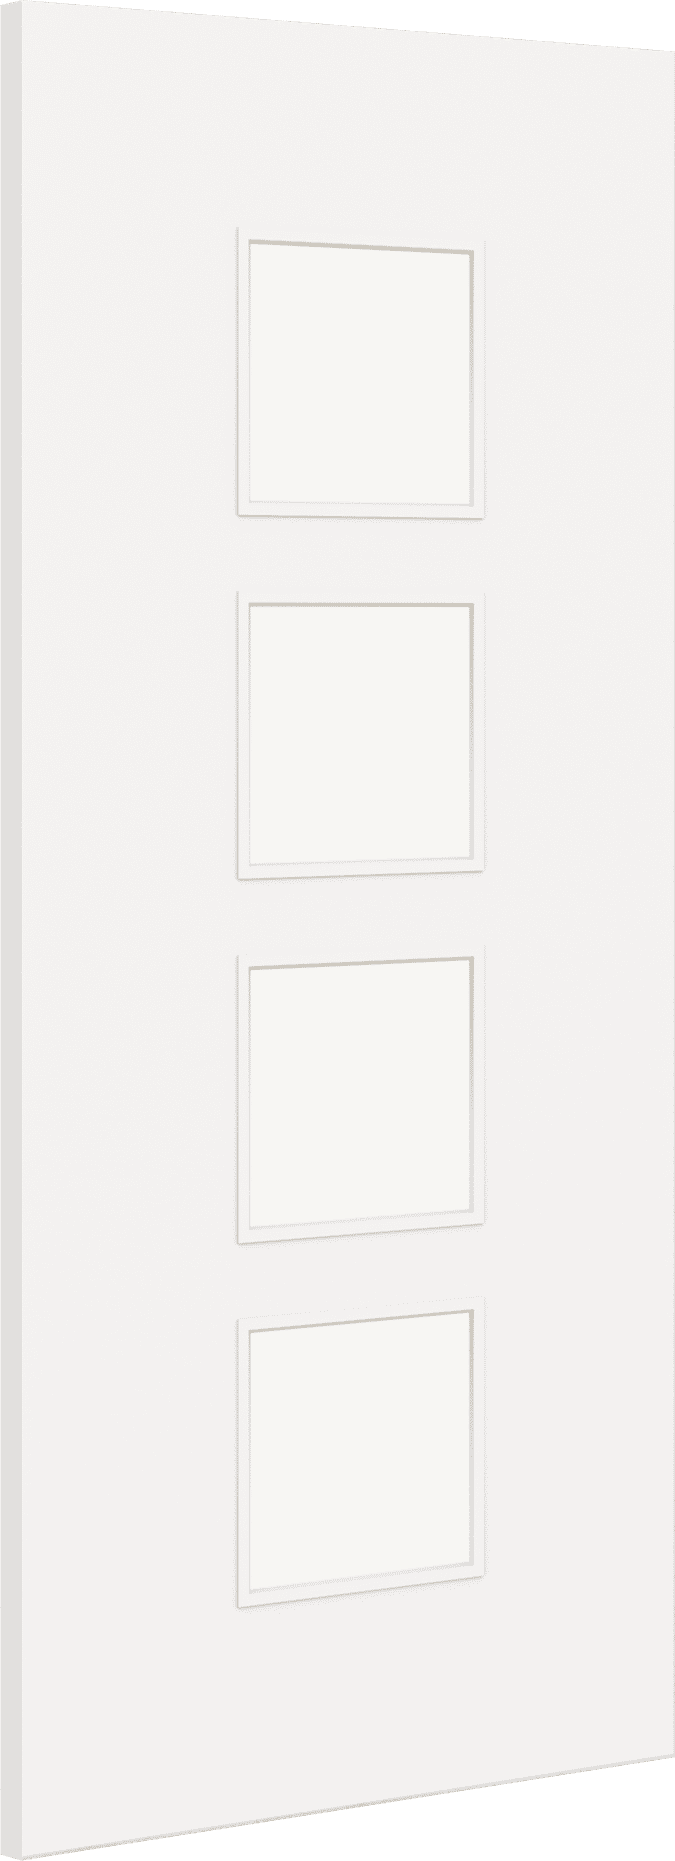 2040mm x 826mm x 44mm Architectural Paint Grade White 09 Frosted Glazed Fire Door Blank